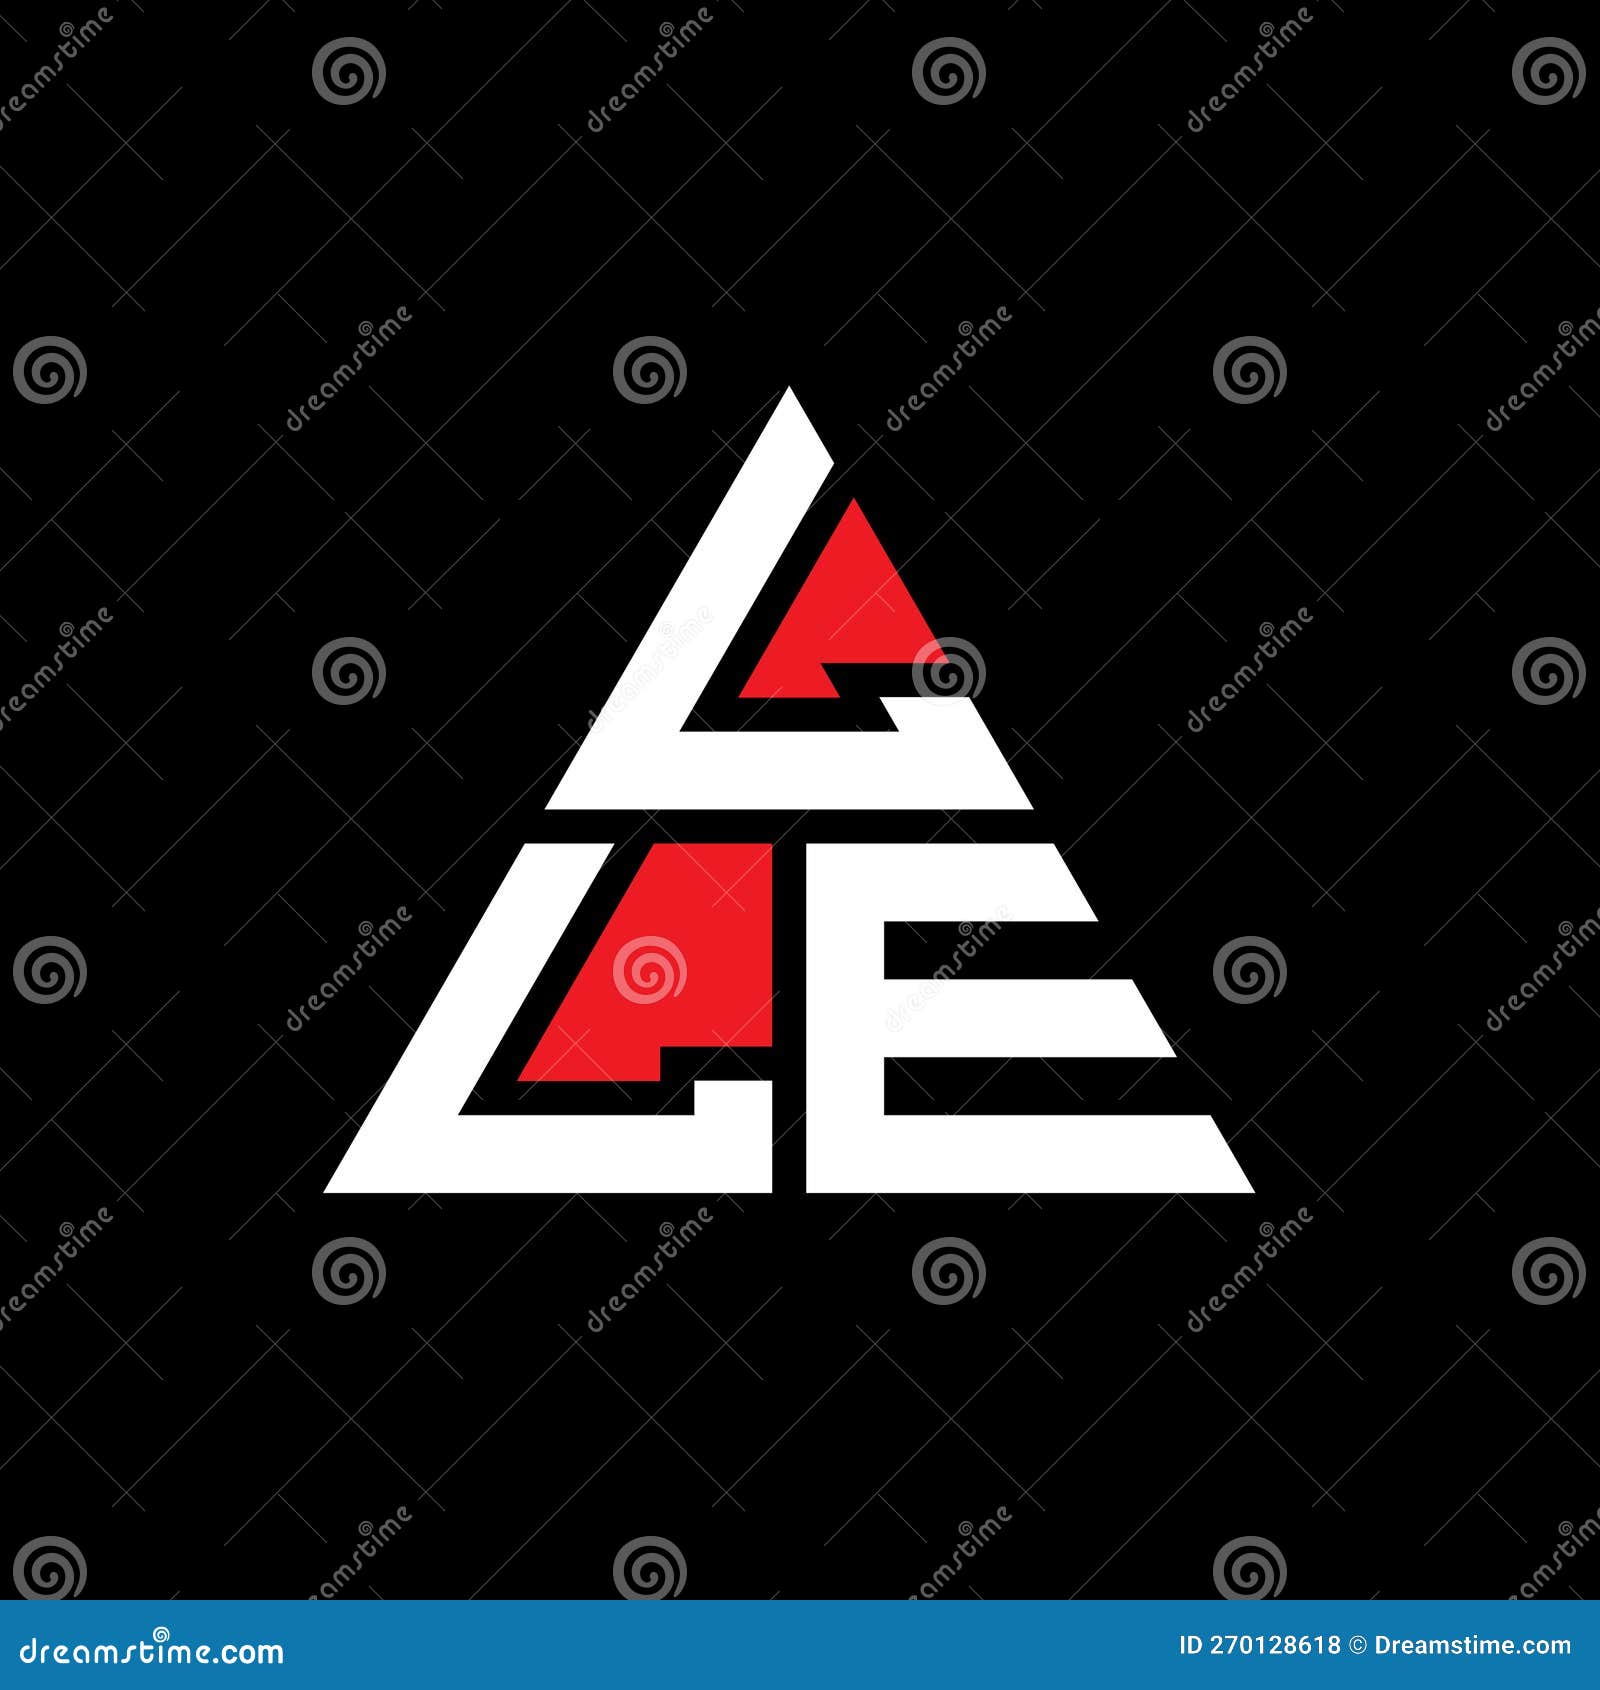 lle triangle letter logo  with triangle . lle triangle logo  monogram. lle triangle  logo template with red